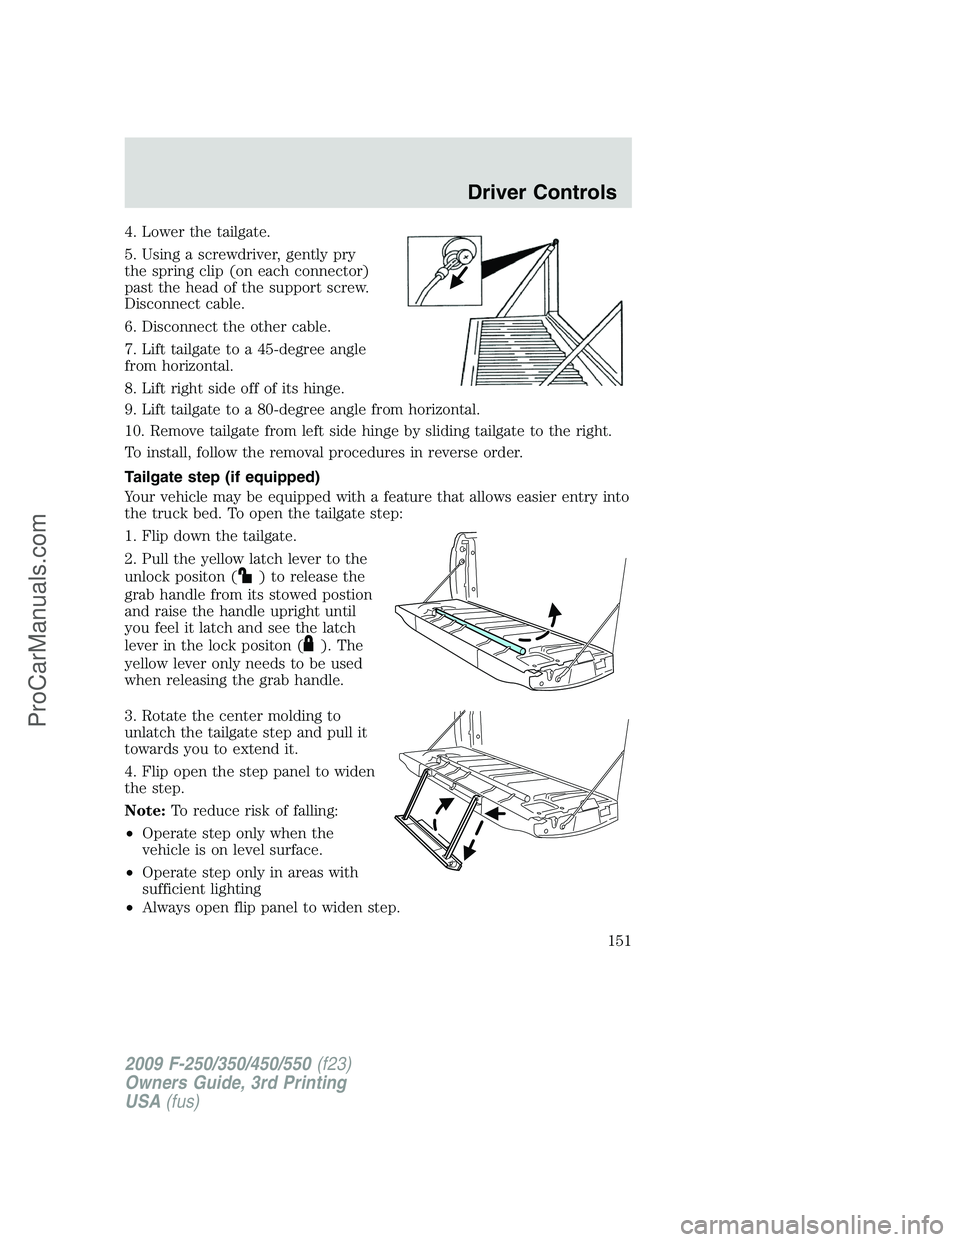 FORD F350 2009  Owners Manual 4. Lower the tailgate.
5. Using a screwdriver, gently pry
the spring clip (on each connector)
past the head of the support screw.
Disconnect cable.
6. Disconnect the other cable.
7. Lift tailgate to a